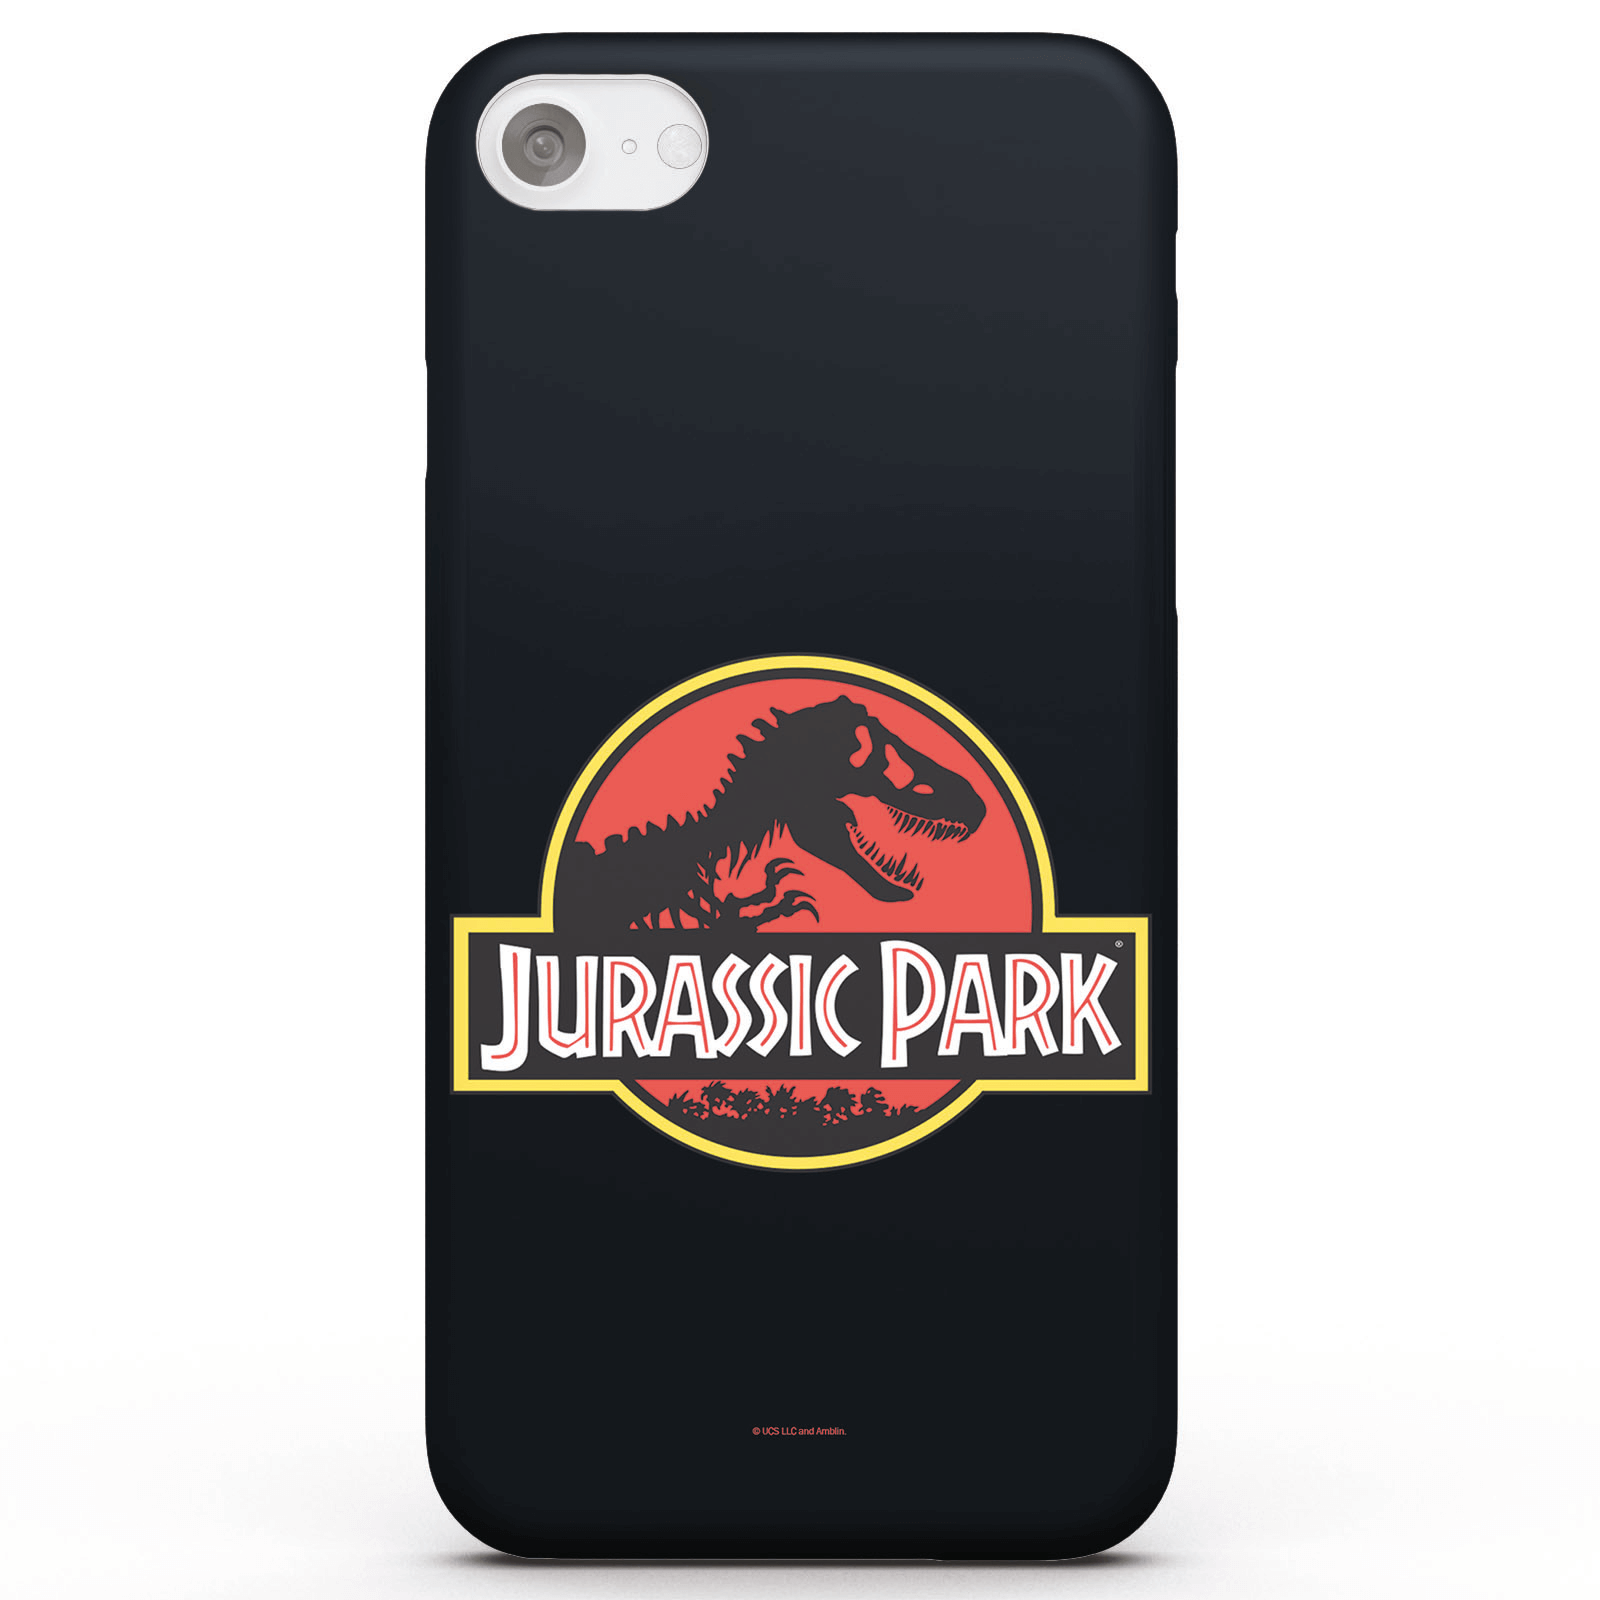 Jurassic Park Logo Phone Case for iPhone and Android - iPhone 5/5s - Snap Case - Matte